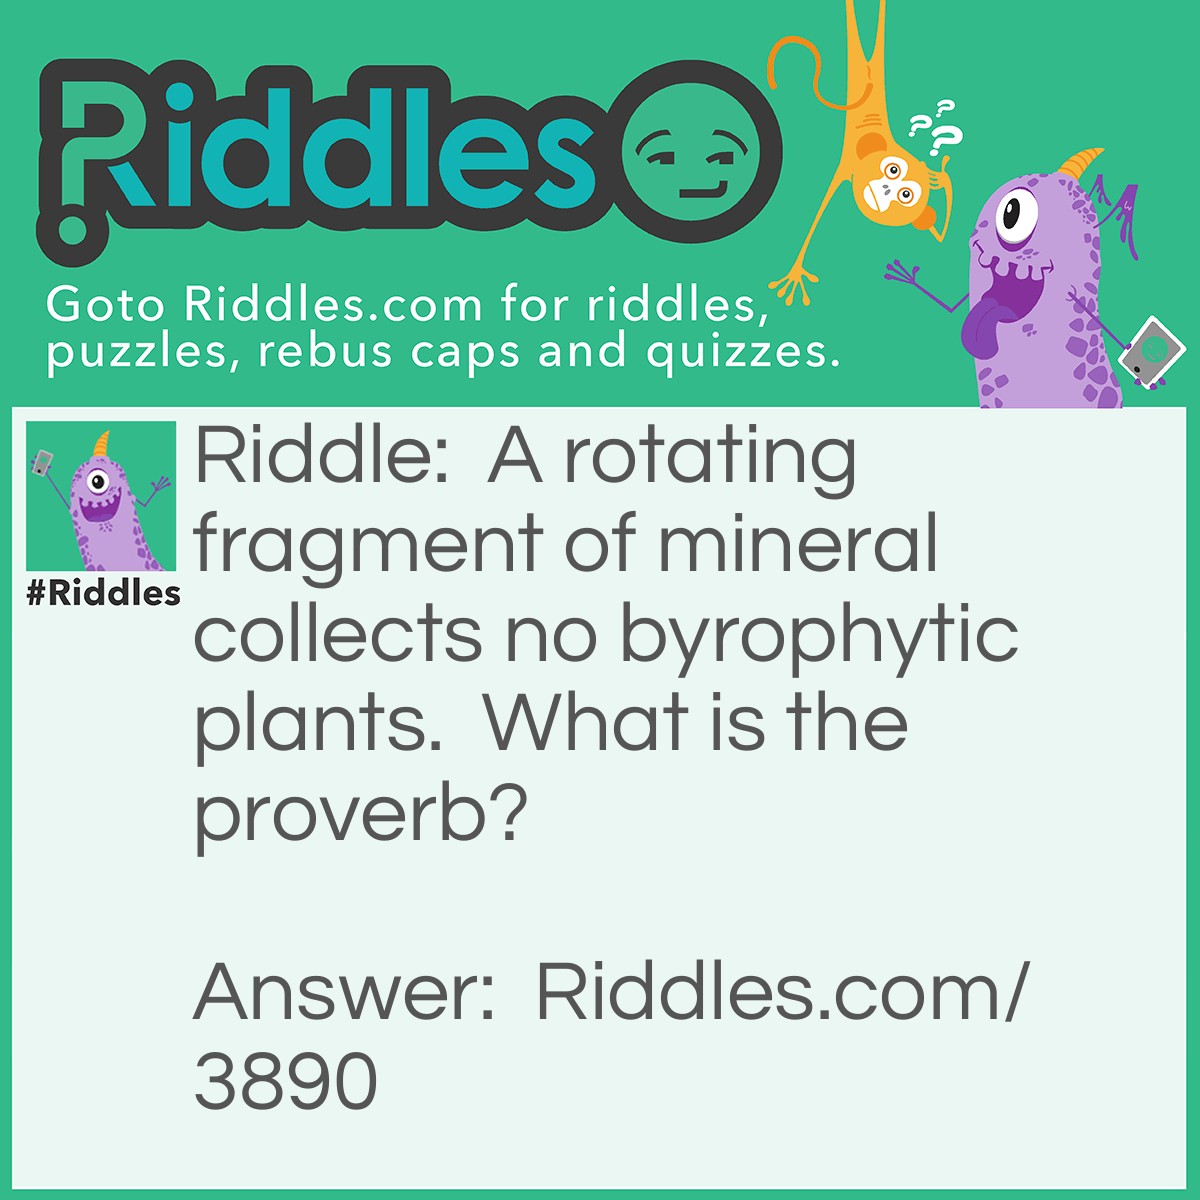 Riddle: A rotating fragment of mineral collects no byrophytic plants. What is the proverb? Answer: A rolling stone gathers no moss.